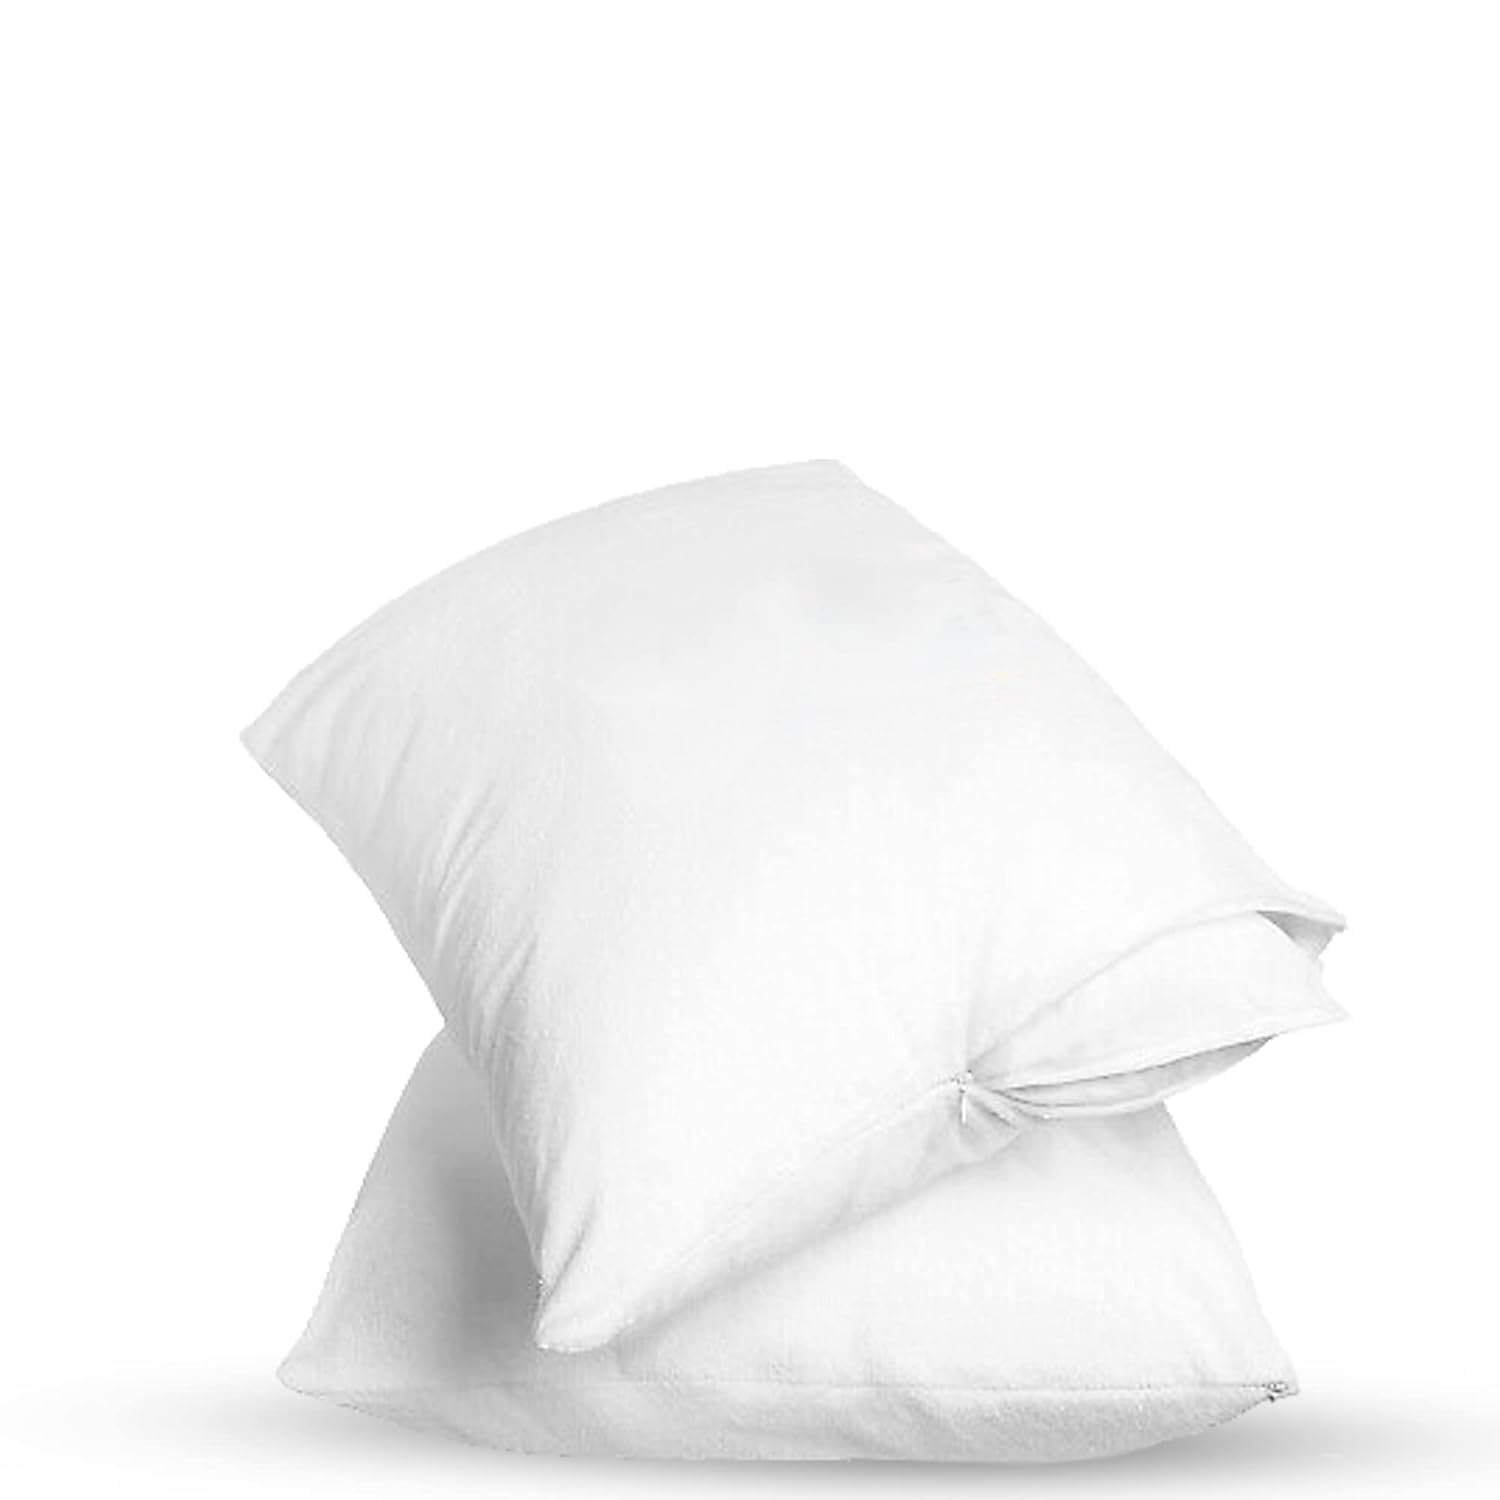 GADDA CO Water Resistant Pillow Cover with Cotton Terry Ultra Soft, Pillow Protector Against Bed Bugs and Dust Mites – Standard Size - 18 X 28 Inch - White - Set of 2